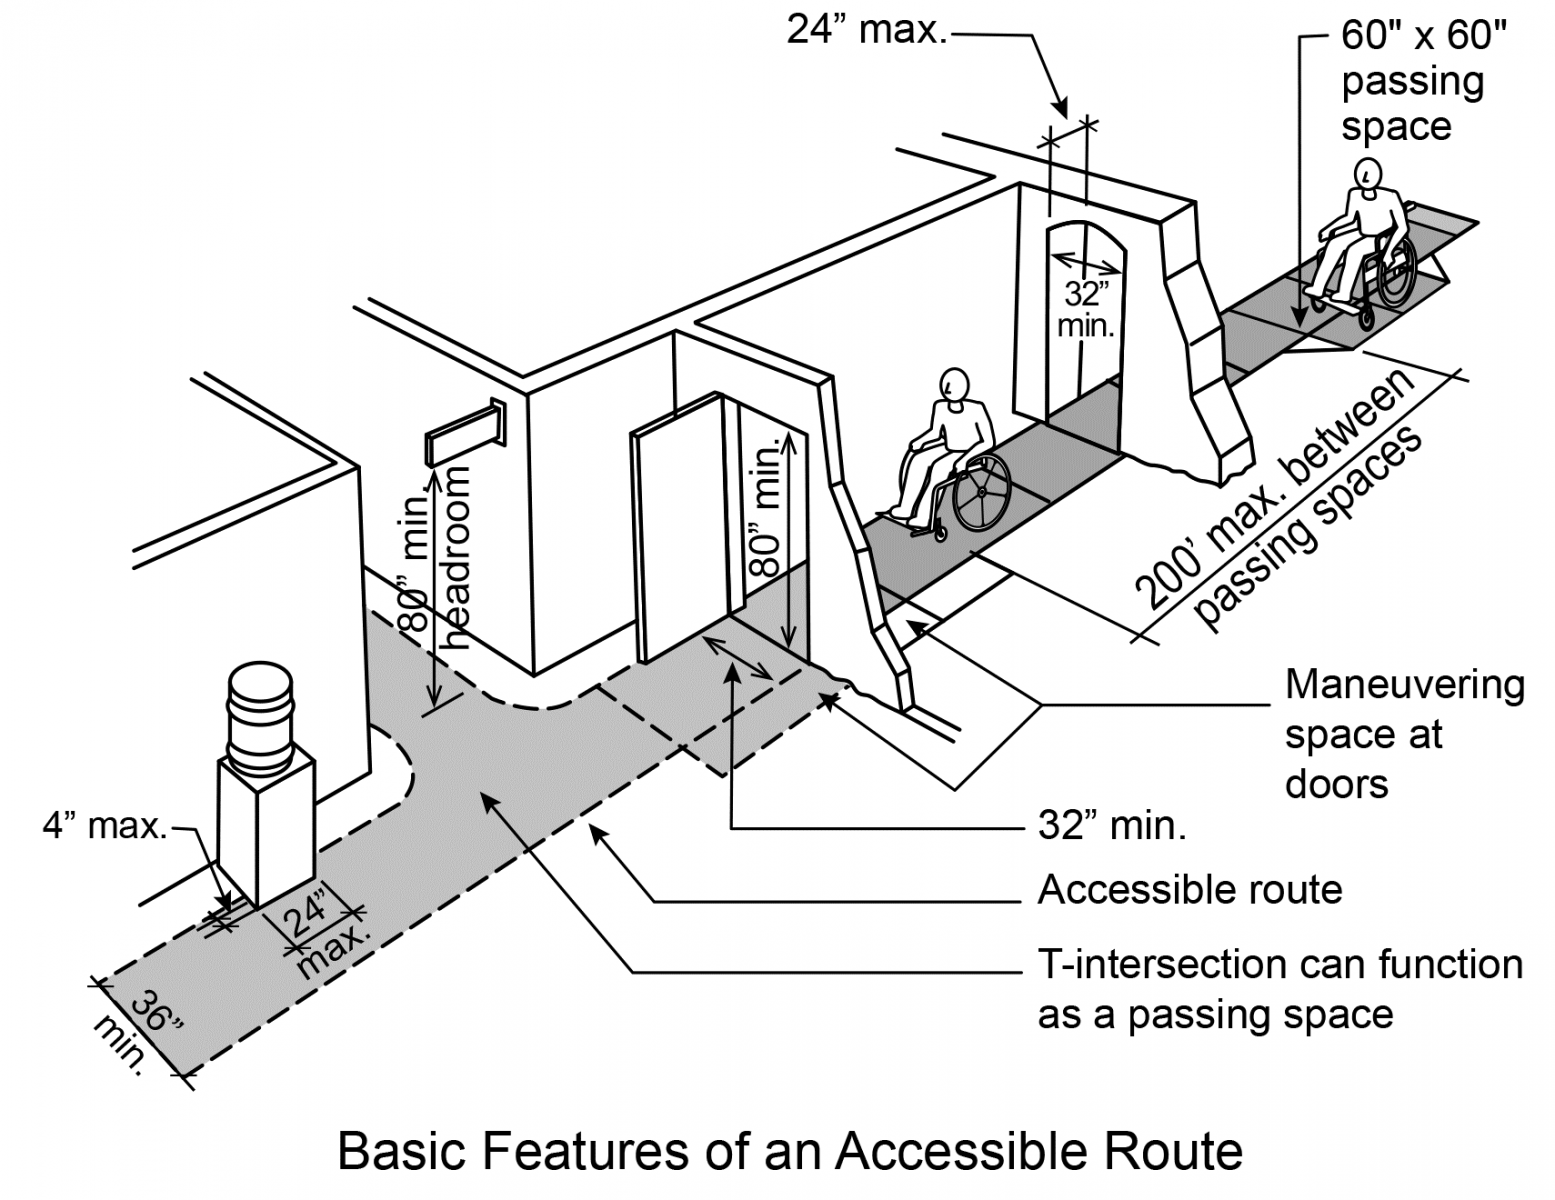 Figure 1: Accessible hallways and doorways inside a building are the minimum width (32 inches) and height (80 inches) for doorways; minimum passing space in a hallways (60 inches by 60 inches); and other dimensions for ensuring an accessible route. 